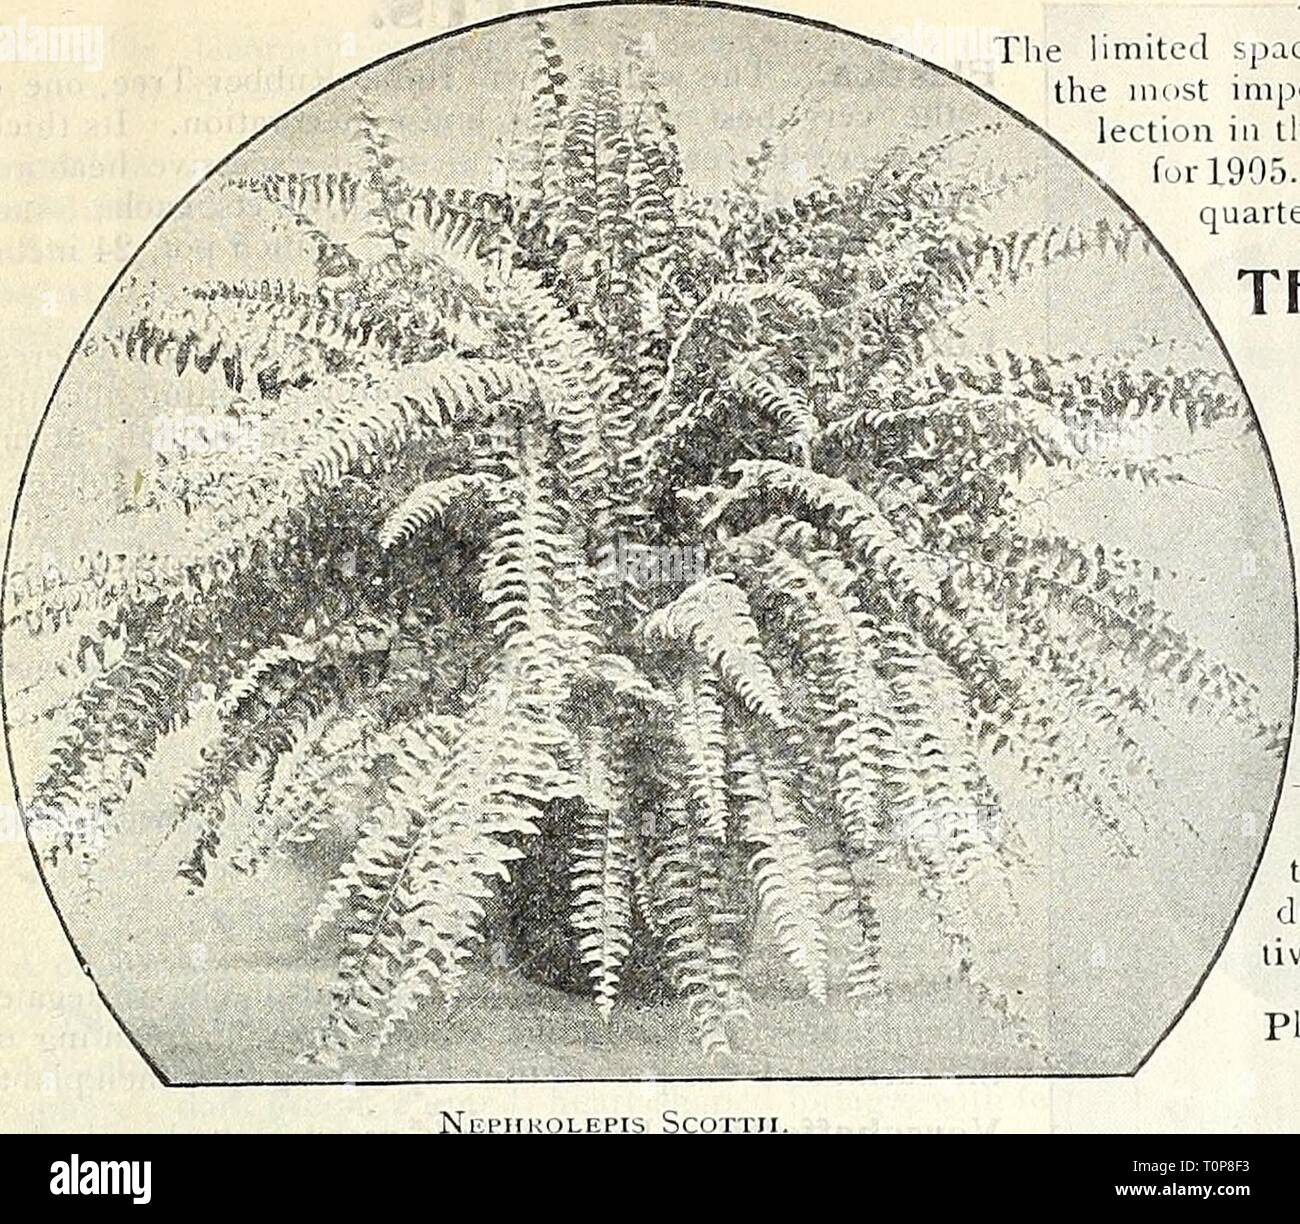 Dreer's autumn catalogue 1905 (1905) Dreer's autumn catalogue 1905  dreersautumncata1905henr Year: 1905  Dreer's Autumn Catalogue, 1905. 33    FINE FERNS. ADIANTUM CUNEATUM. The most pOfJulai- of the .Maiden-hair Ferns, and which, with careful treatment, will succeed as a house plani. Strong plants, lo CIS., 25 els. and .jj cts. each. ADIANTUM FARI.EYE1SSE. The most beautiful of the Mai.ien-hairs, but reiiuires the moist atmosphere of the greenhouse for its successlul cultiva- tion. 25 cts., 50 cts. and $L.OO each. DAVALI.IA FIJIENSIS PEUMOSA. (The Fiji I.slaiid Fern.) A iiiOit beautiful I'ern Stock Photo